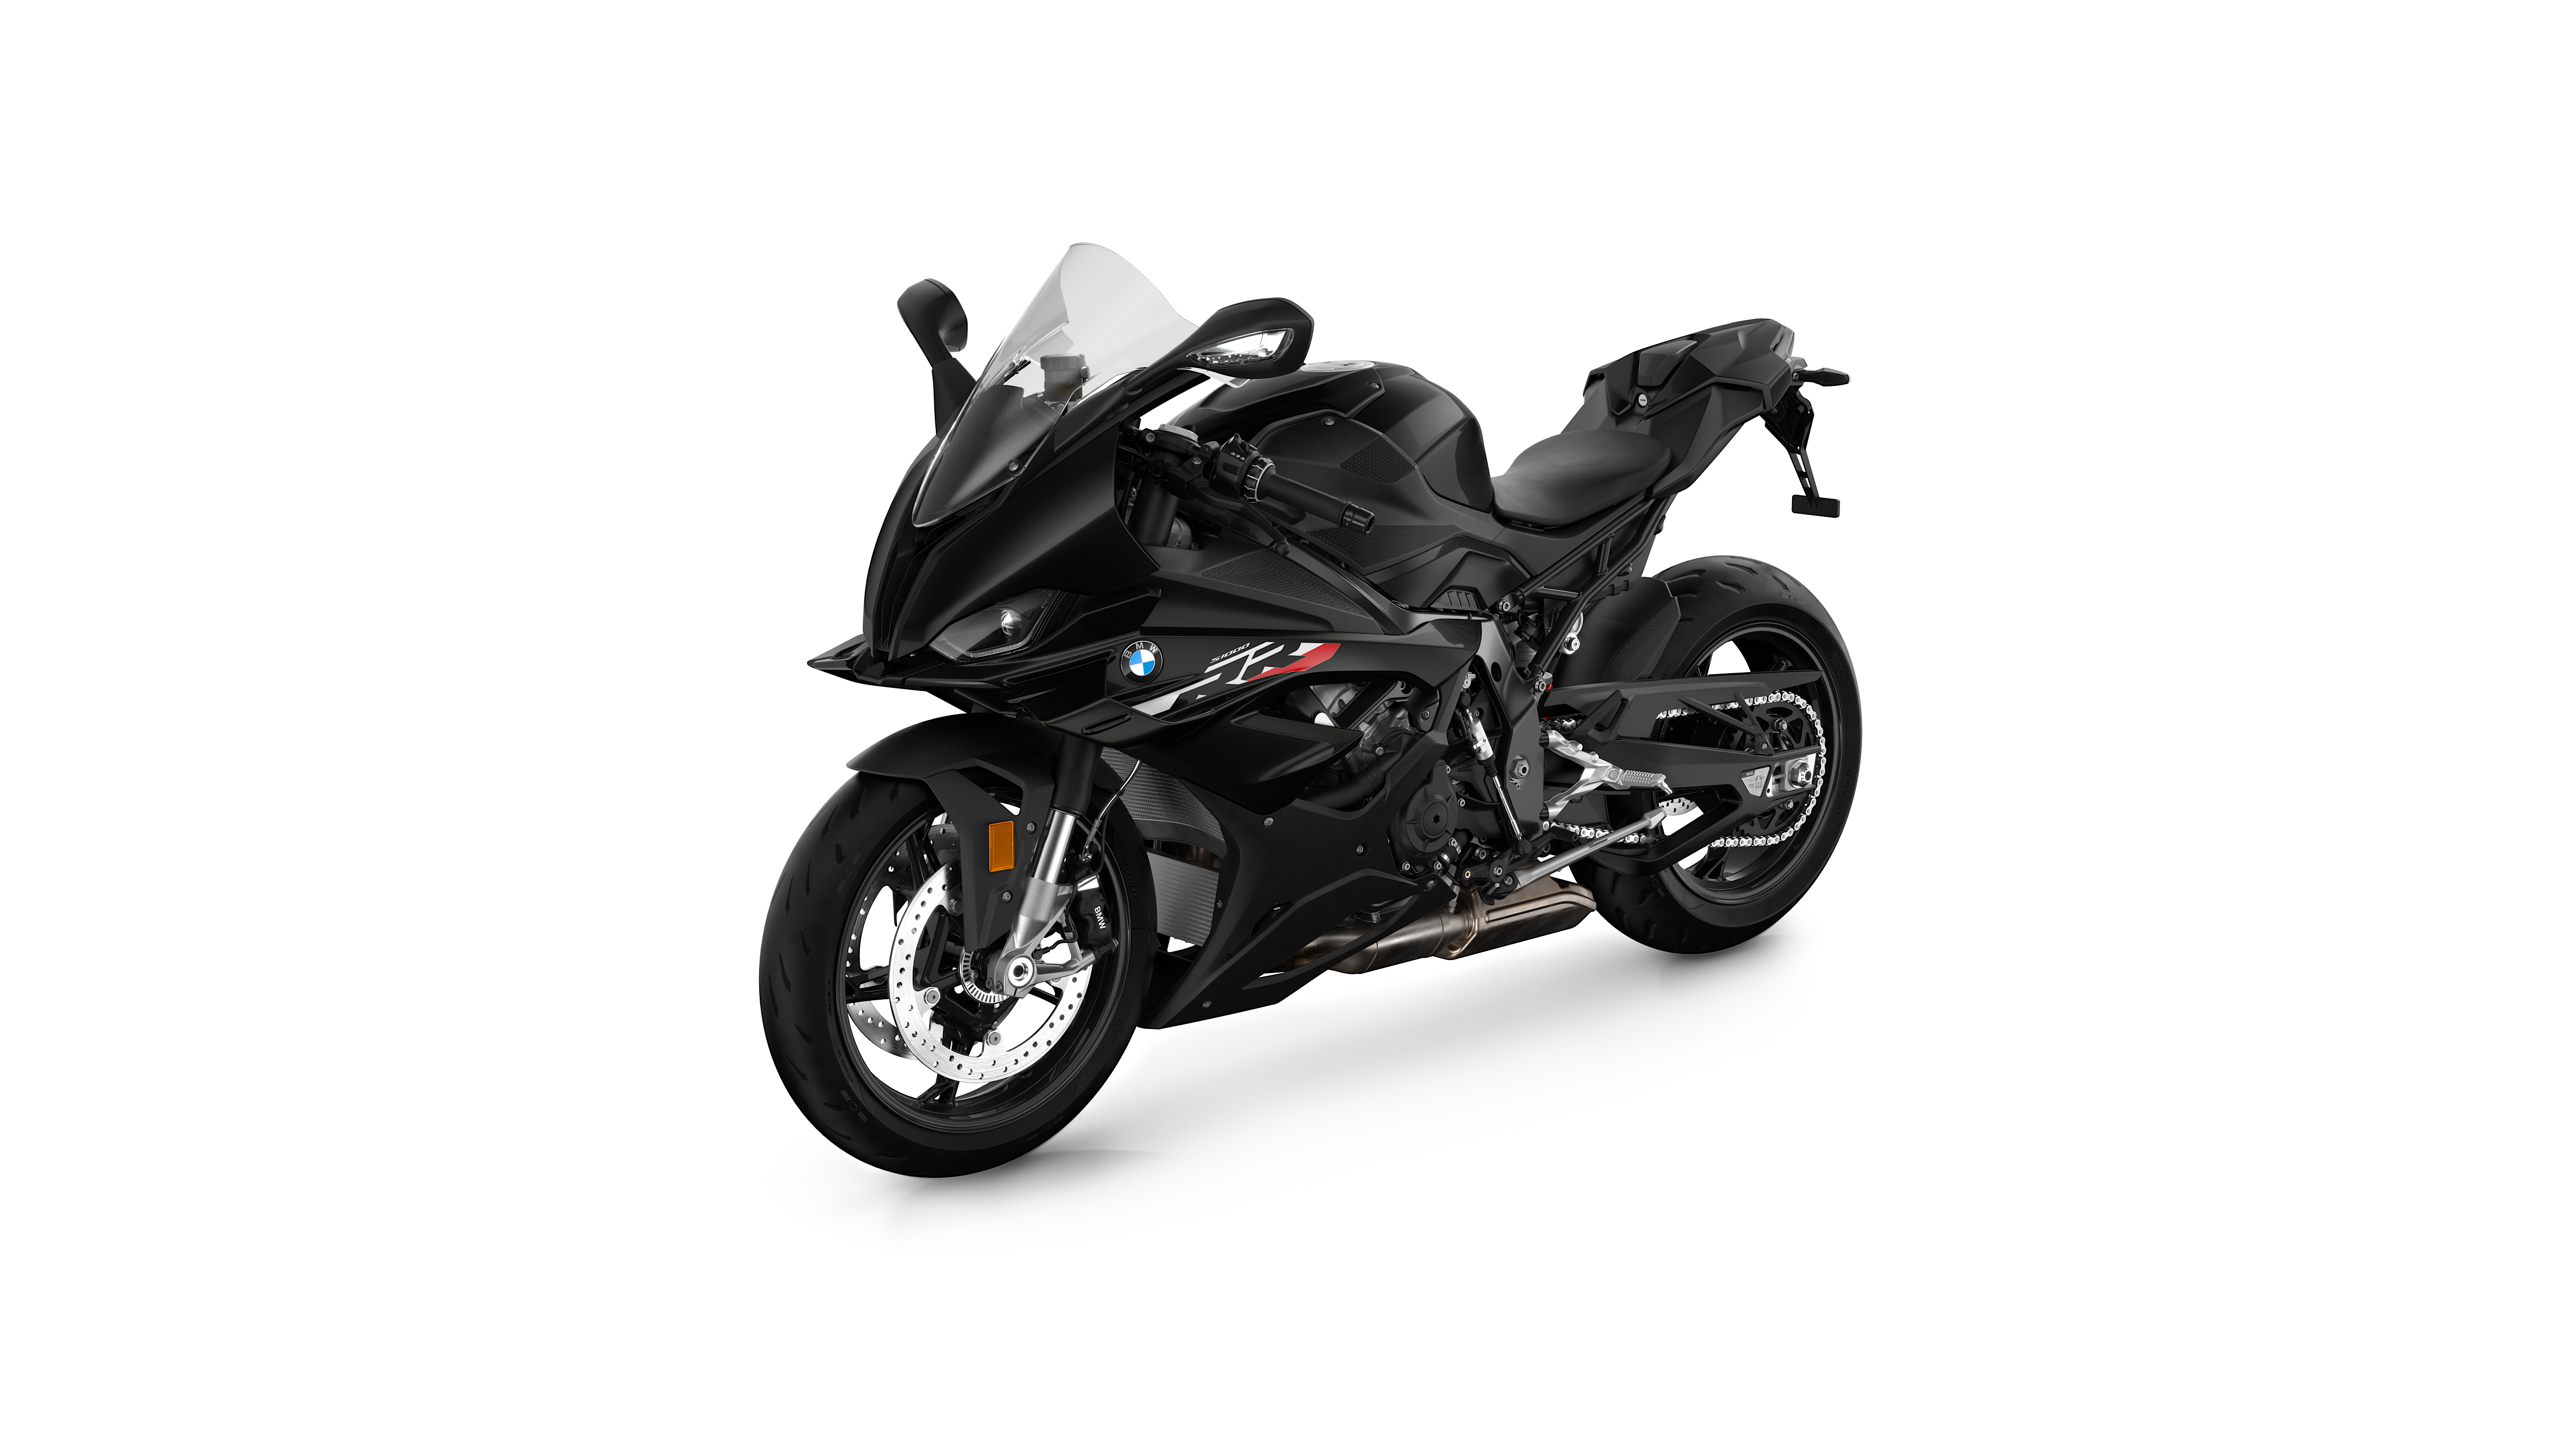 BMW S1000RR Wallpapers - Top 35 Best BMW S1000RR Backgrounds